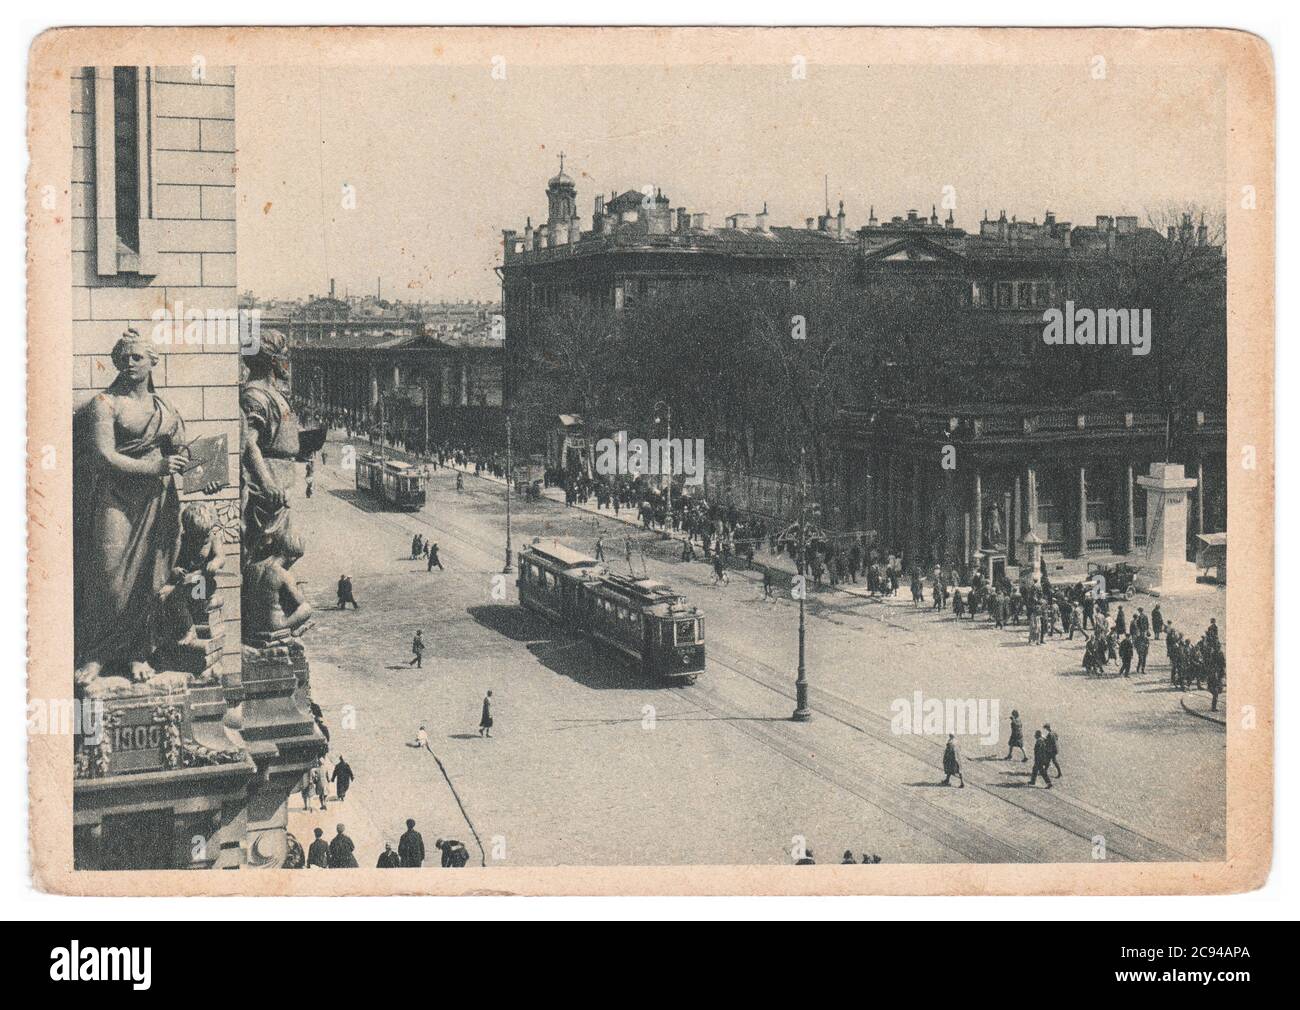 RUSSIA, USSR - CIRCA 1929: a monochrome postcard shows The Avenue of the 25th October at Leningrad Stock Photo